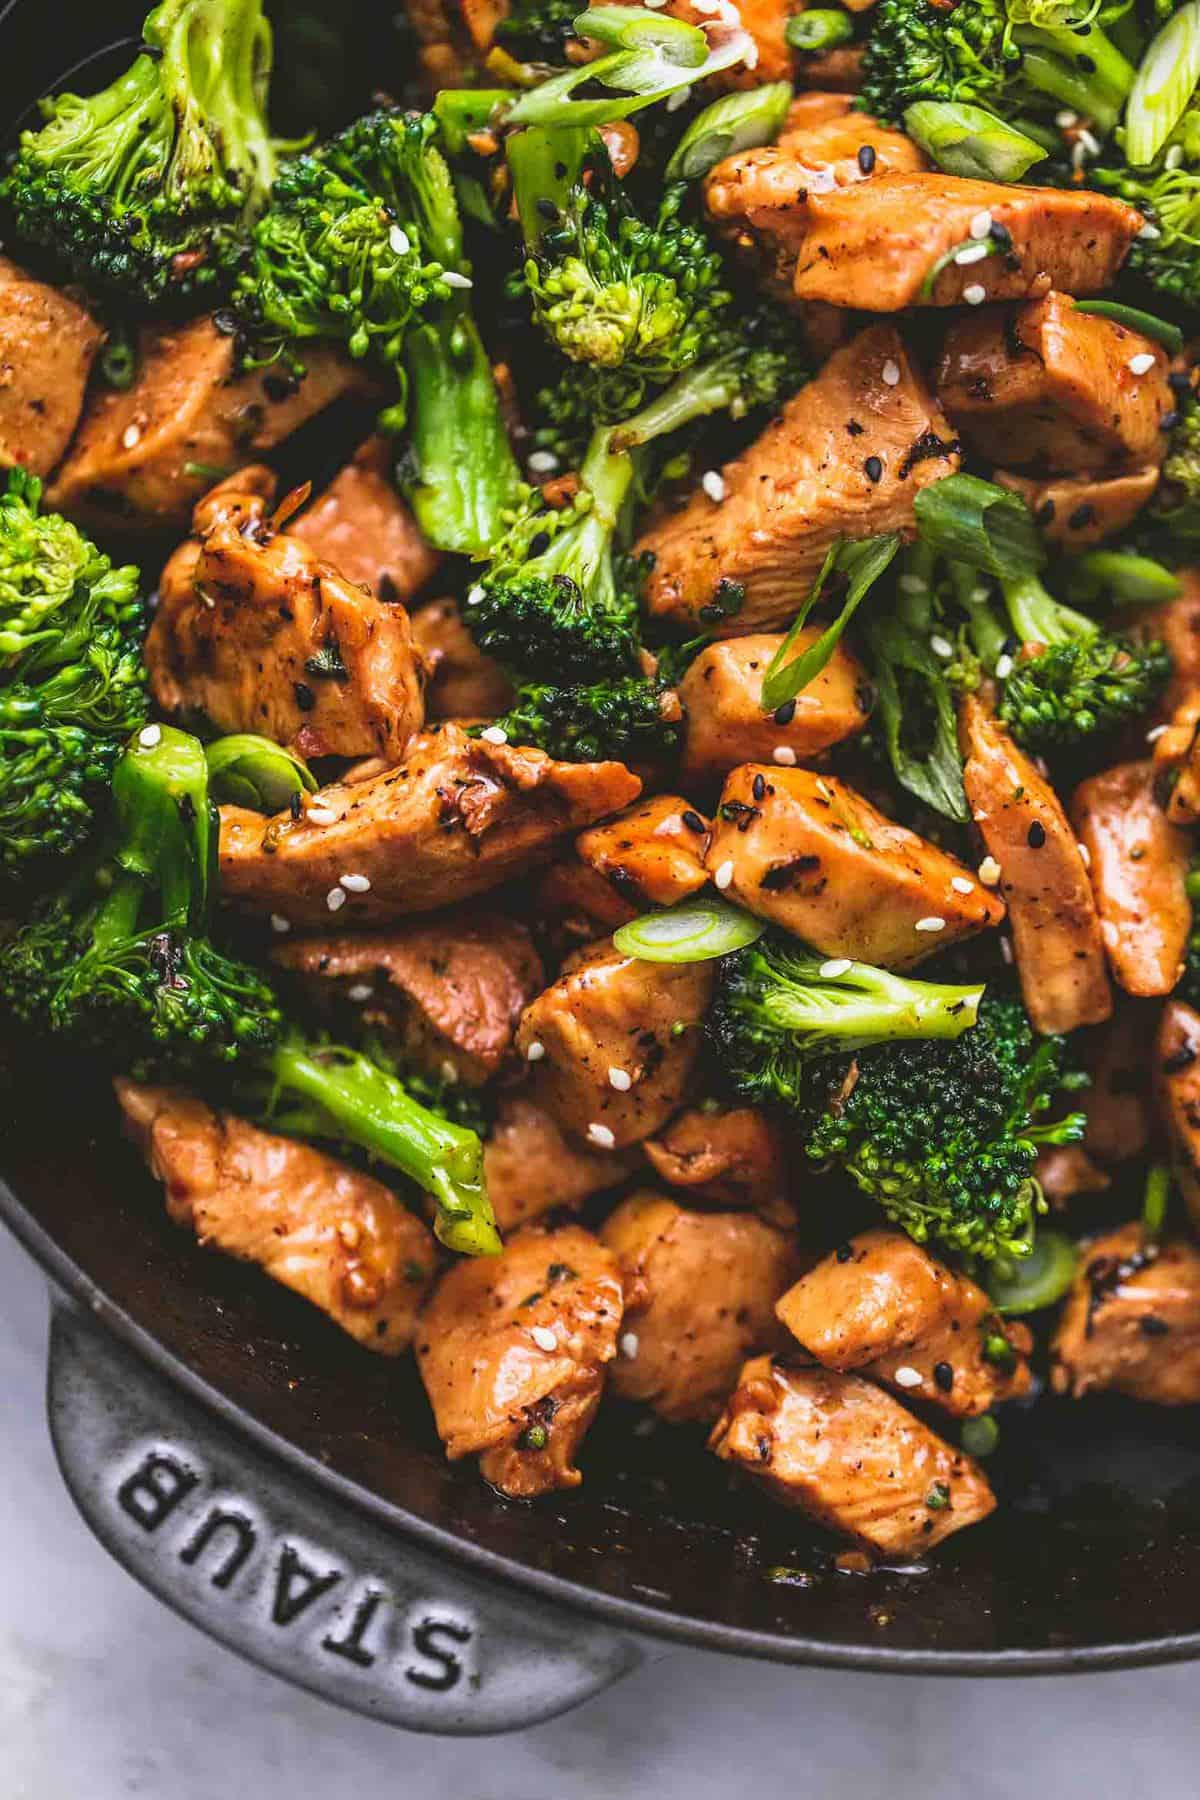 Easiest Way to Make Easy Chicken Stir Fry Recipes